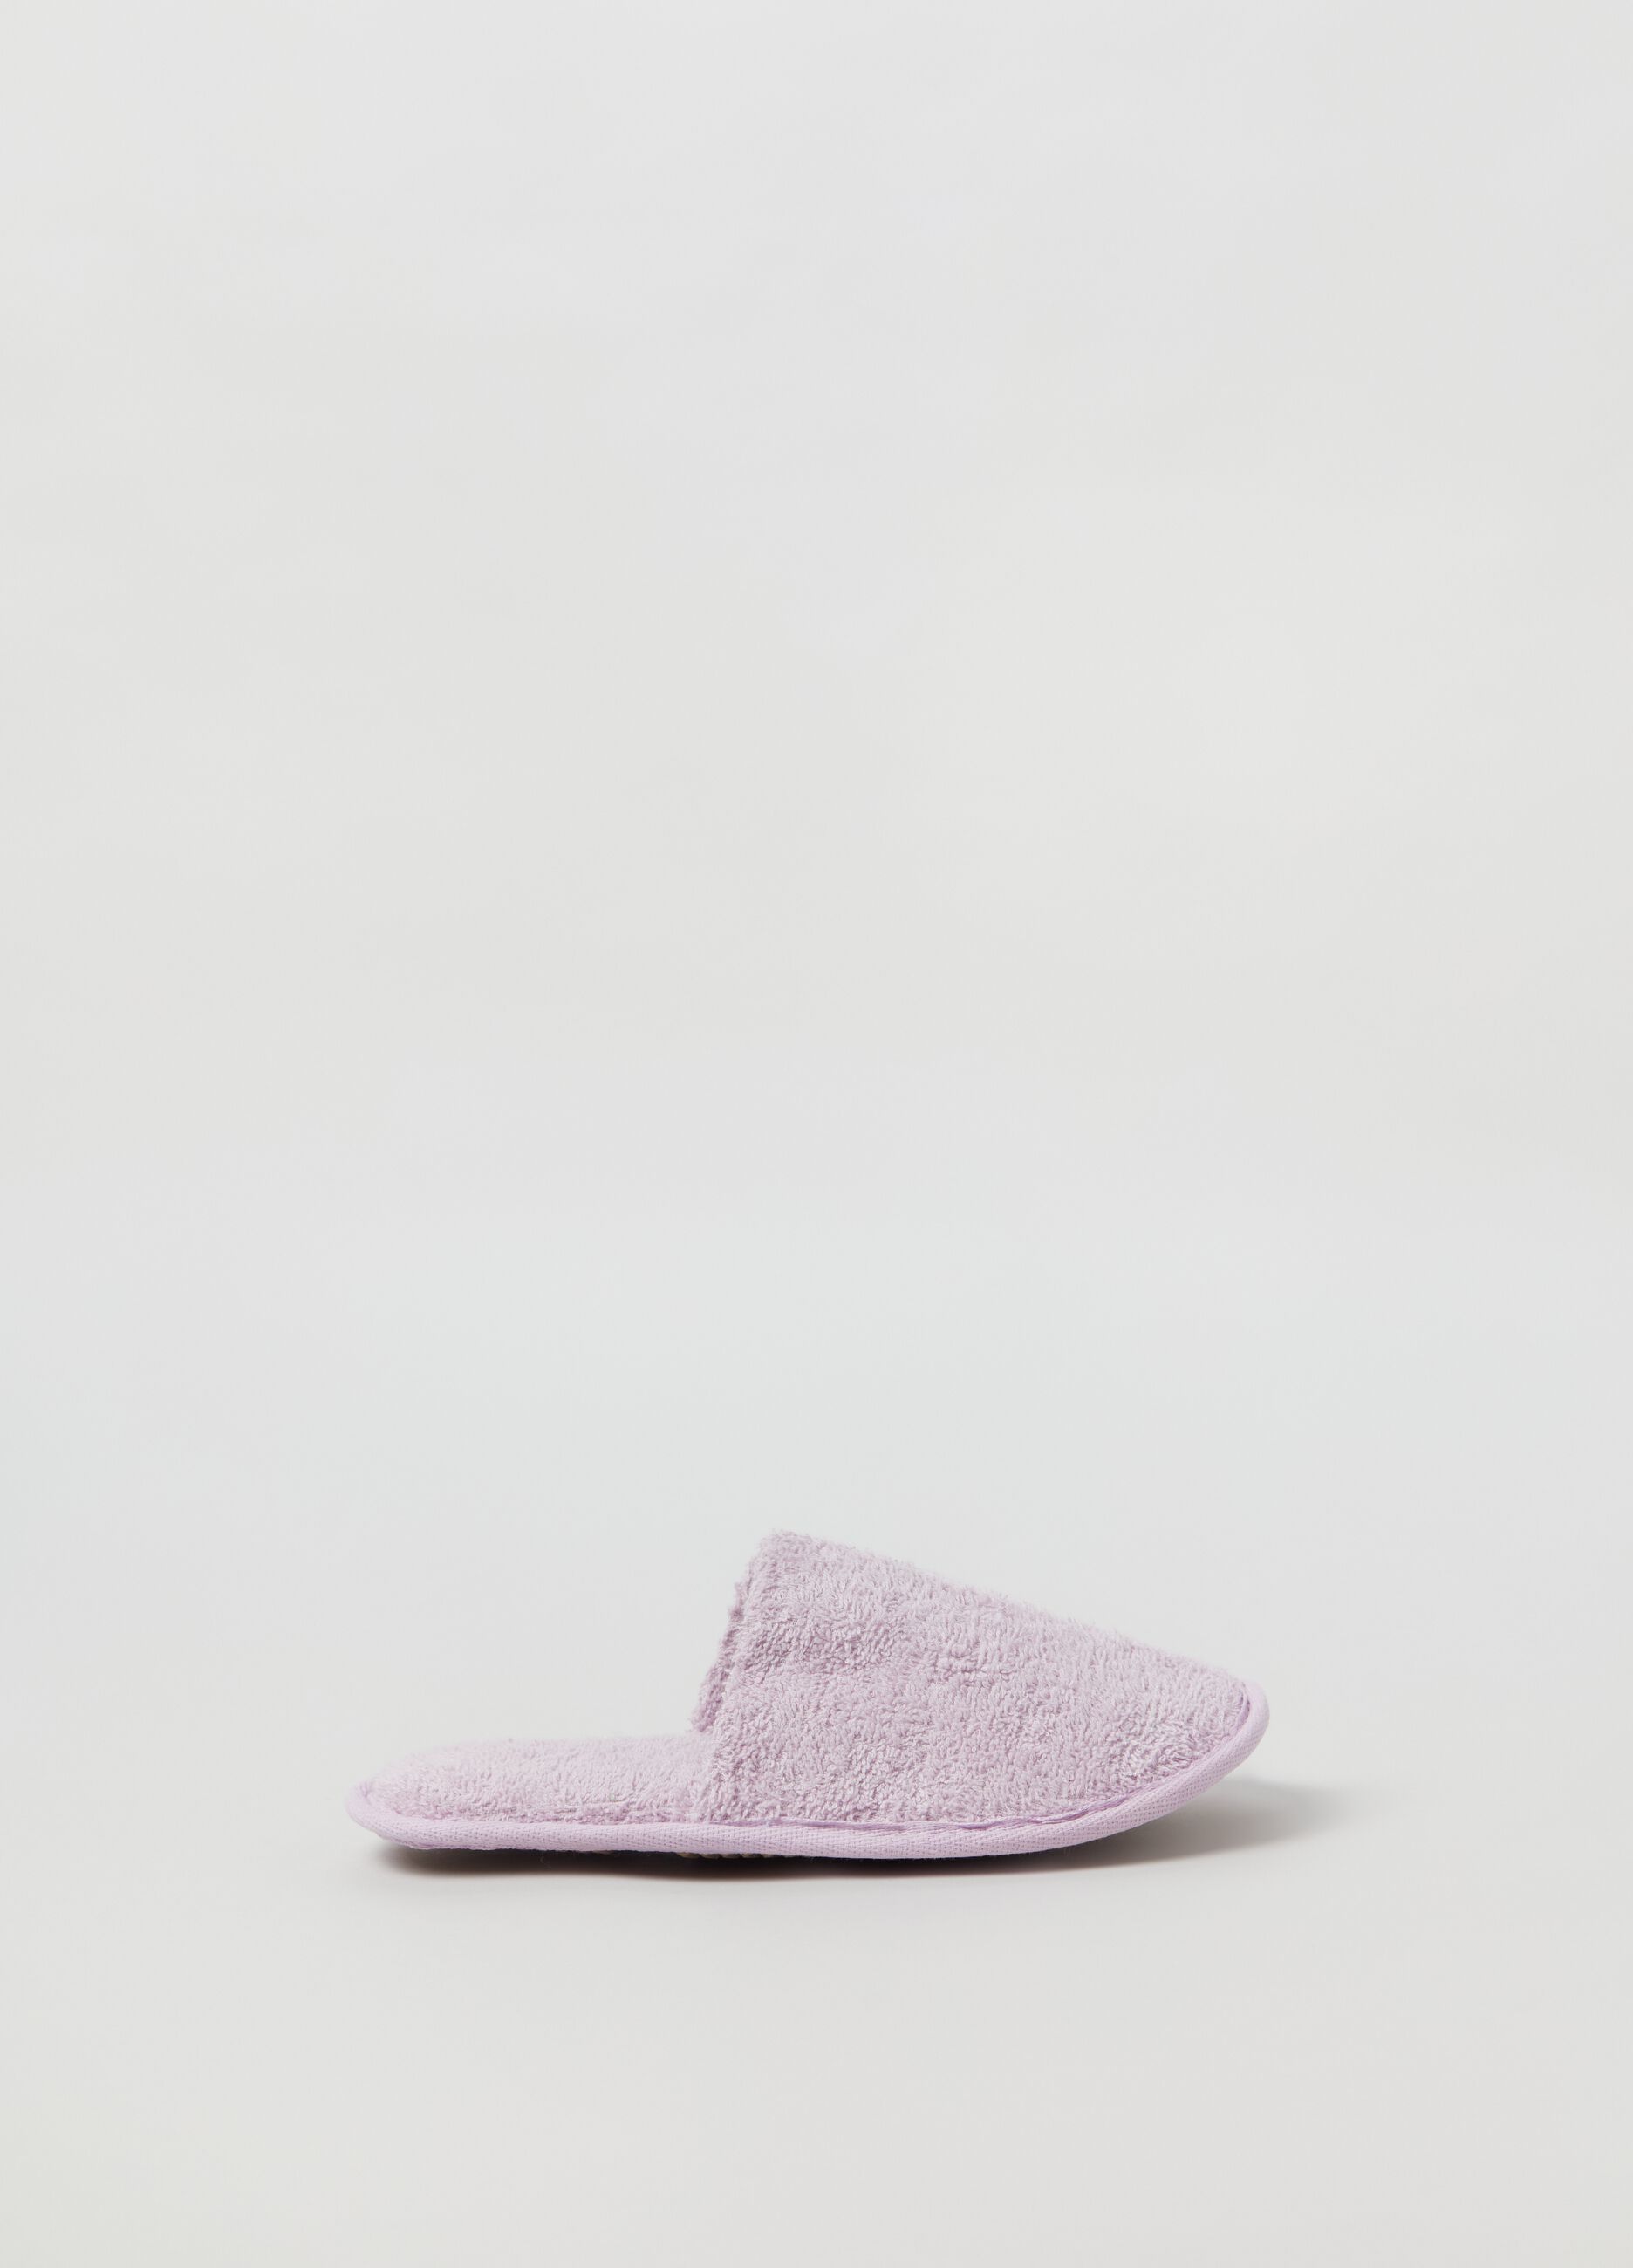 Slippers 35/37 solid colour (pink)